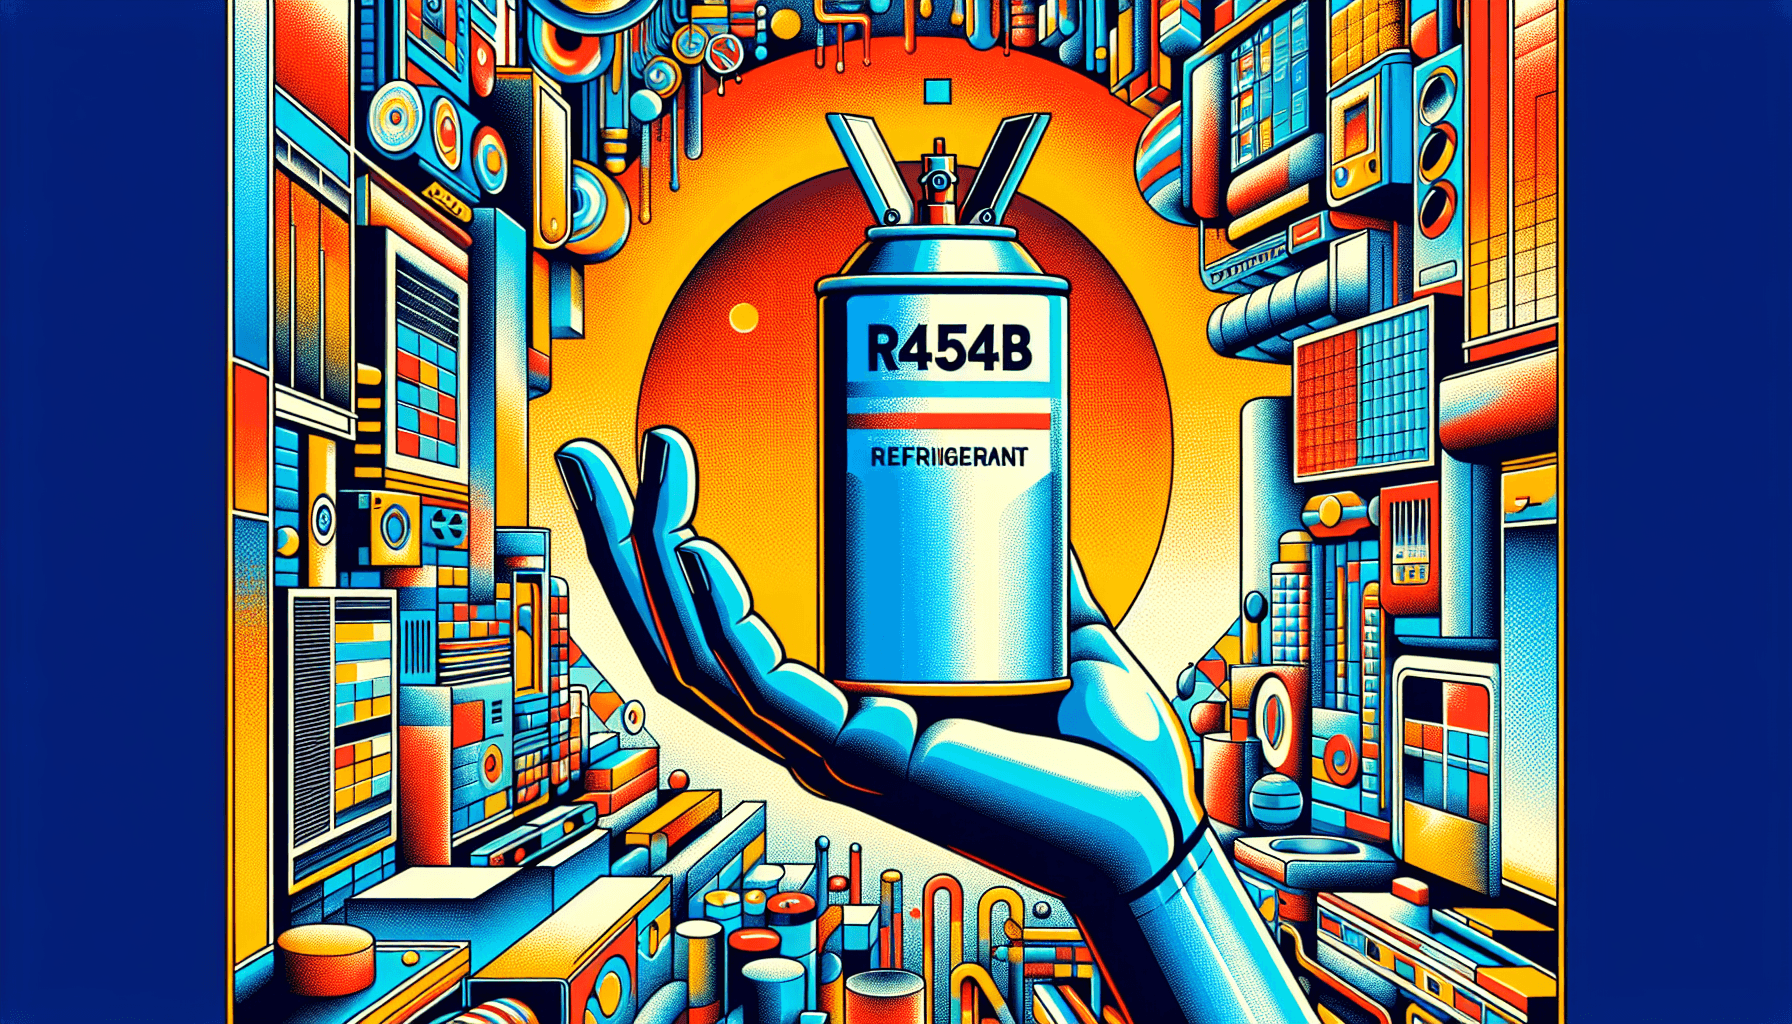 Your Guide to R454b Refrigerant Properties: What Homeowners Need to Know